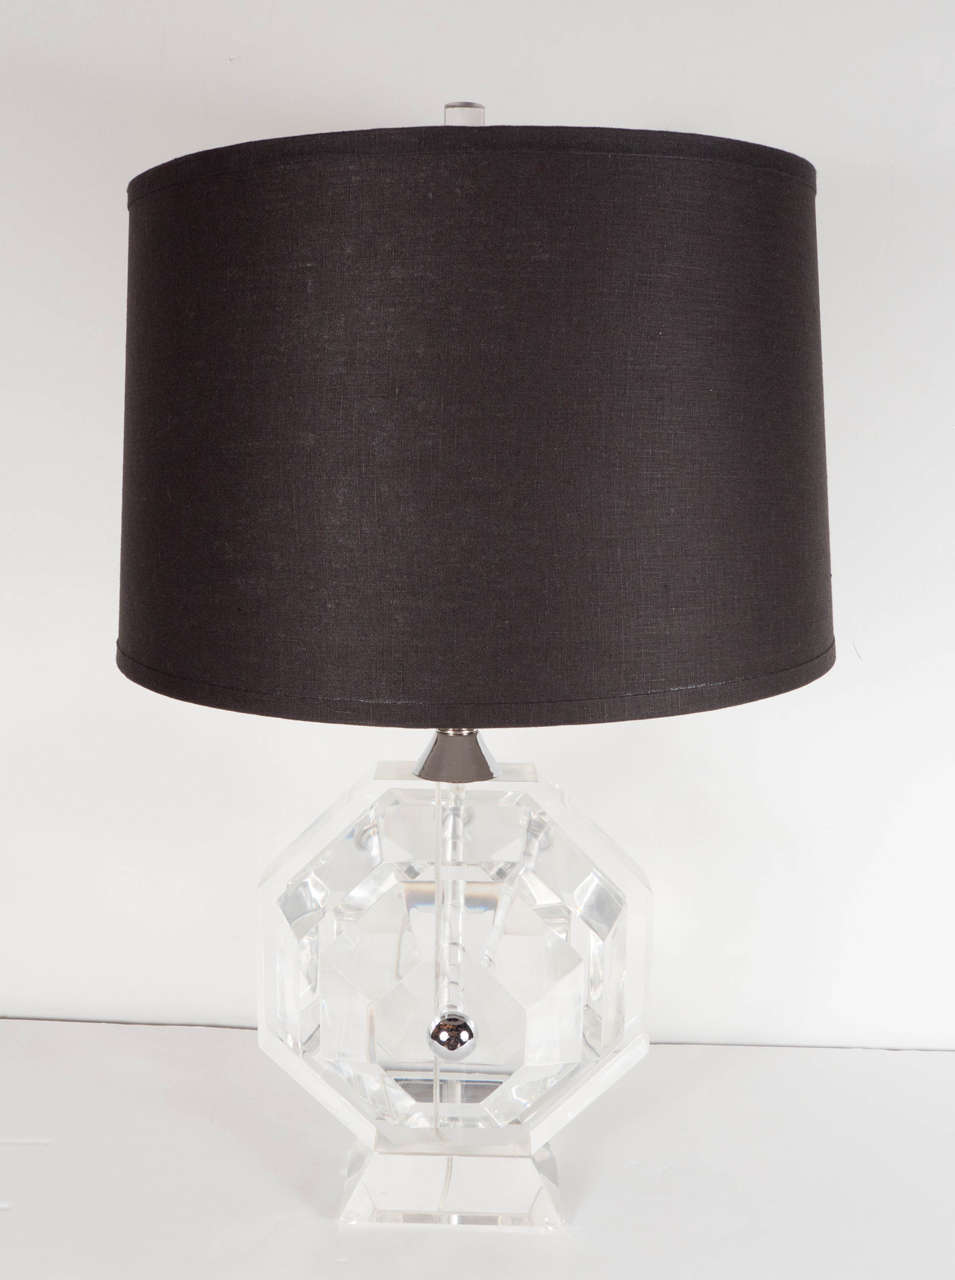 This magnificent pair of Mid-Century Modernist table lamps by Prismatiques feature an octagonal thick Lucite form shape with chrome detailing on the neck and centre base. These are high quality lamps and are in excellent condition and they have been